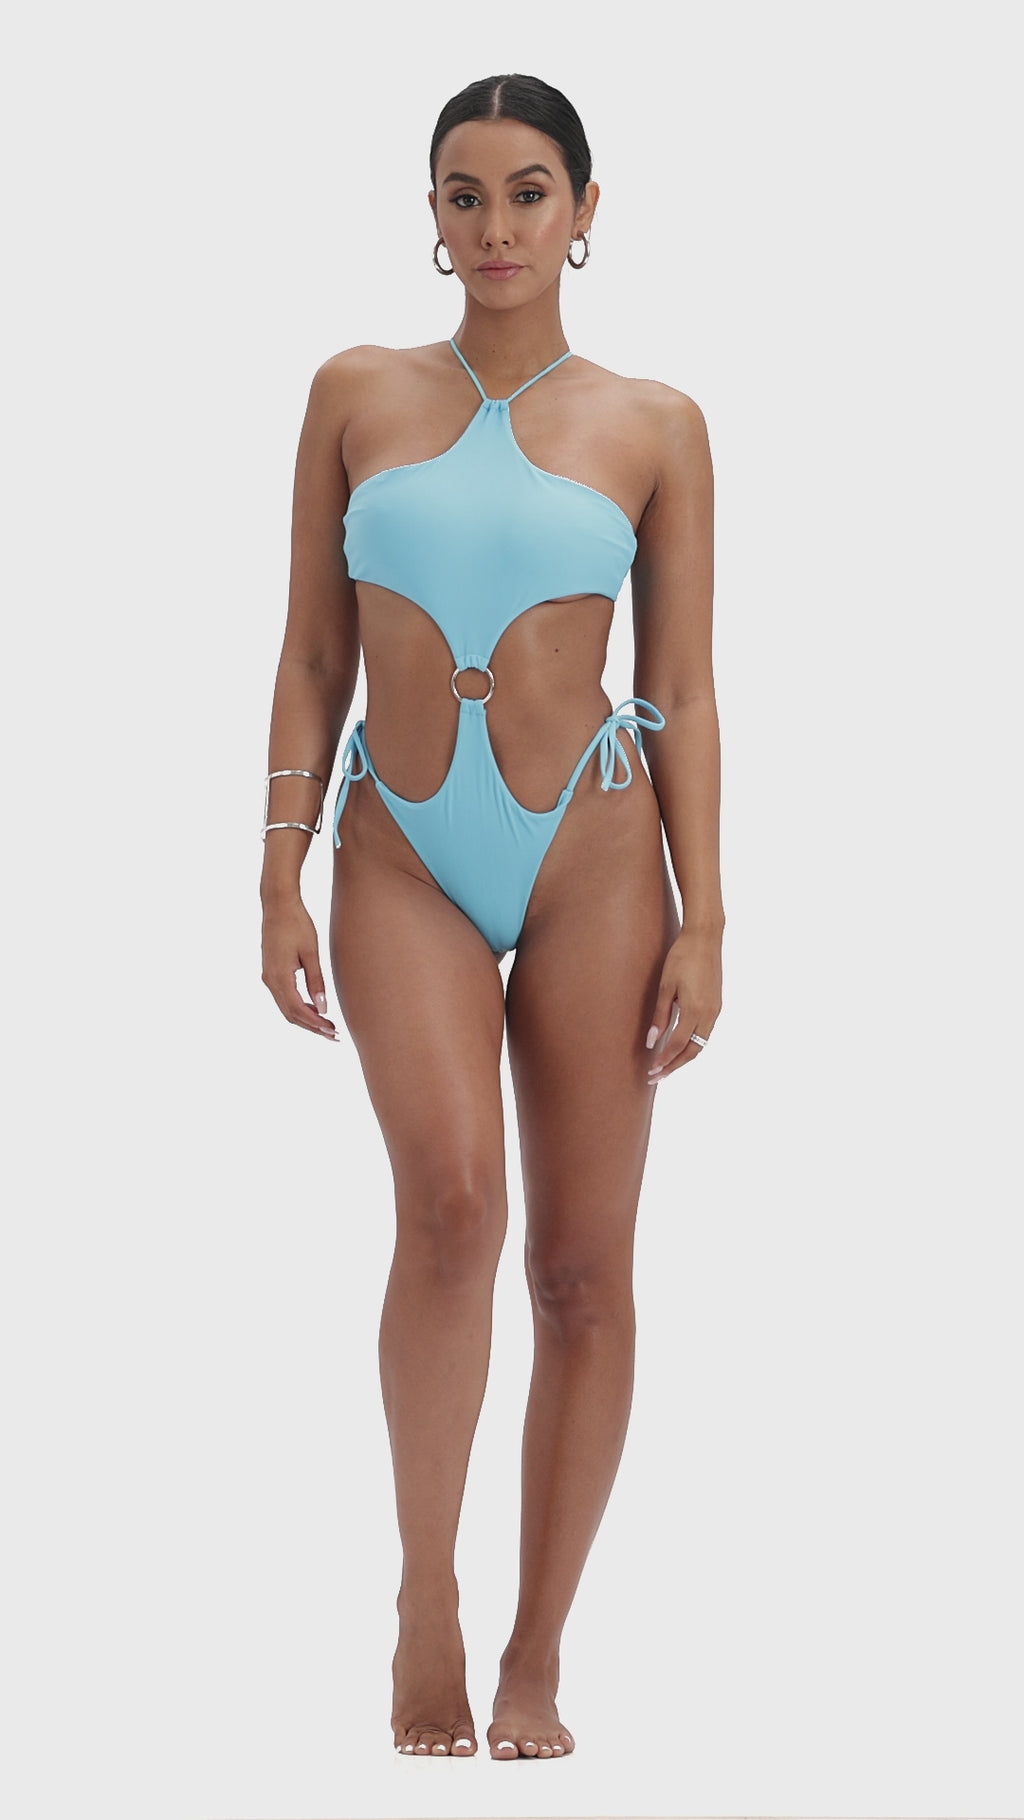 YGLONG Maillot De Bain Femme 1 Pieces Sexy of Spotondle Swimshing